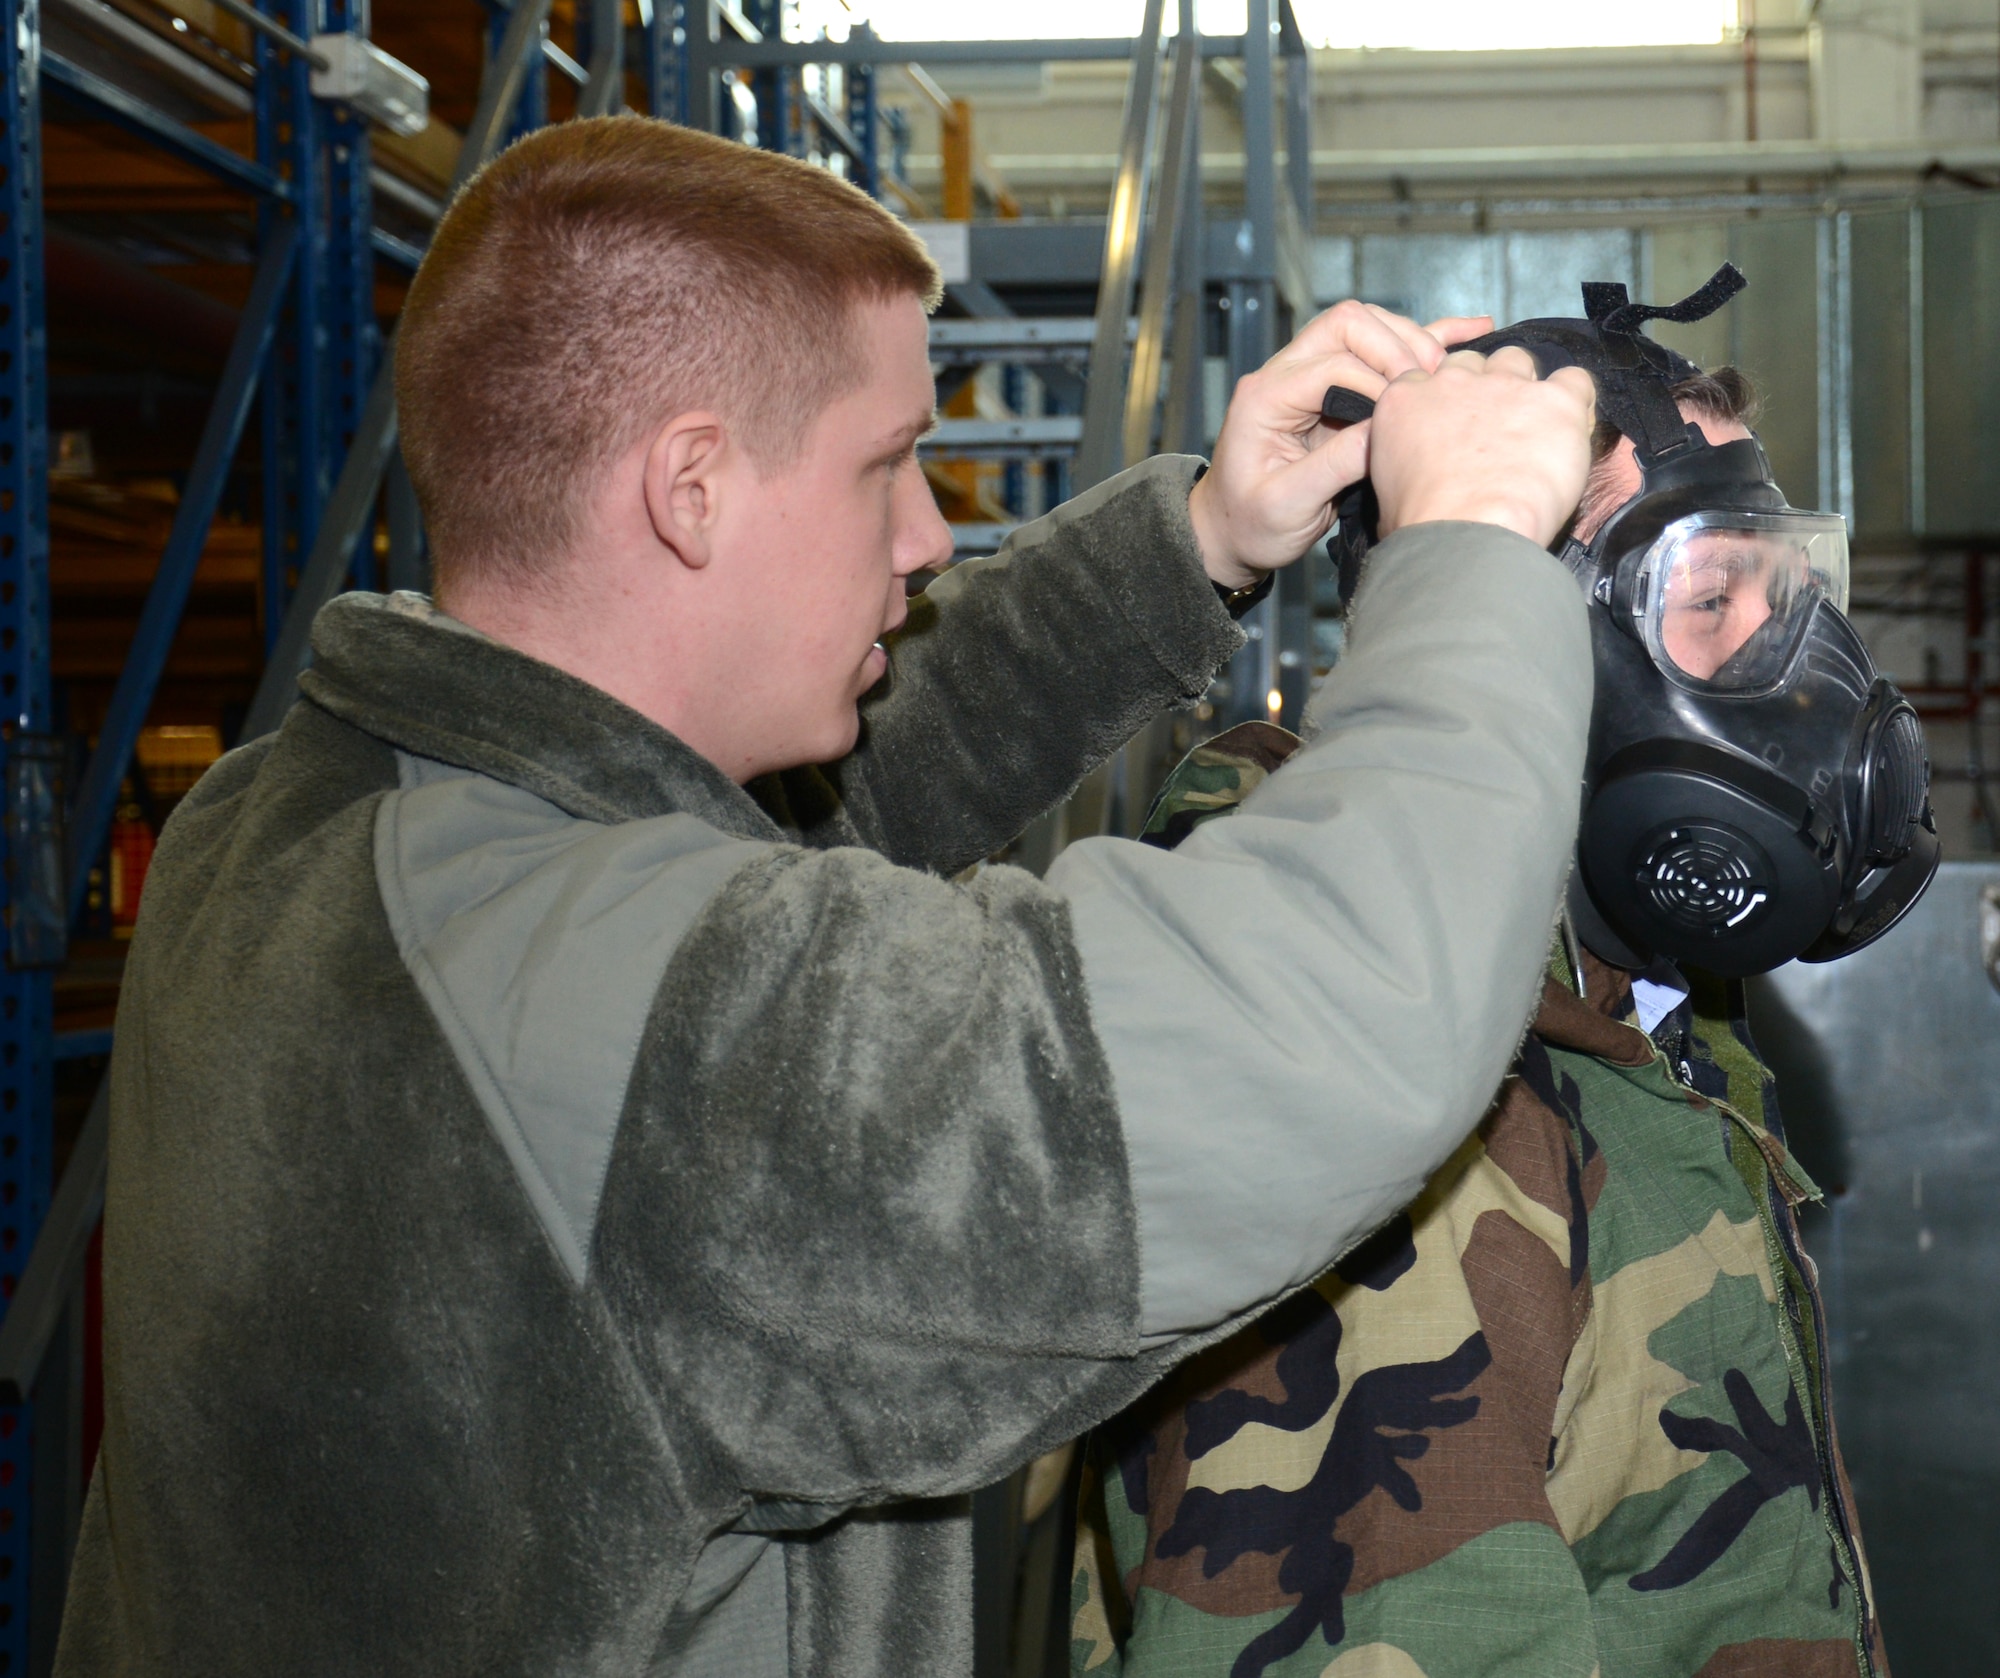 U.S. Air Force Airman 1st Class James Brewer, left, 100th Logistics Readiness Squadron Individual Protective Equipment mobility apprentice from Shawnee, Okla., assists Flying Officer Graham Macalister with a chemical gear gas mask demonstration Feb. 24, 2015, on RAF Mildenhall, England. Royal Air Force Logistics officers visited with members of the 100th LRS during a site tour to further improve relations between the two nations. (U.S. Air Force photo by Gina Randall/Released)